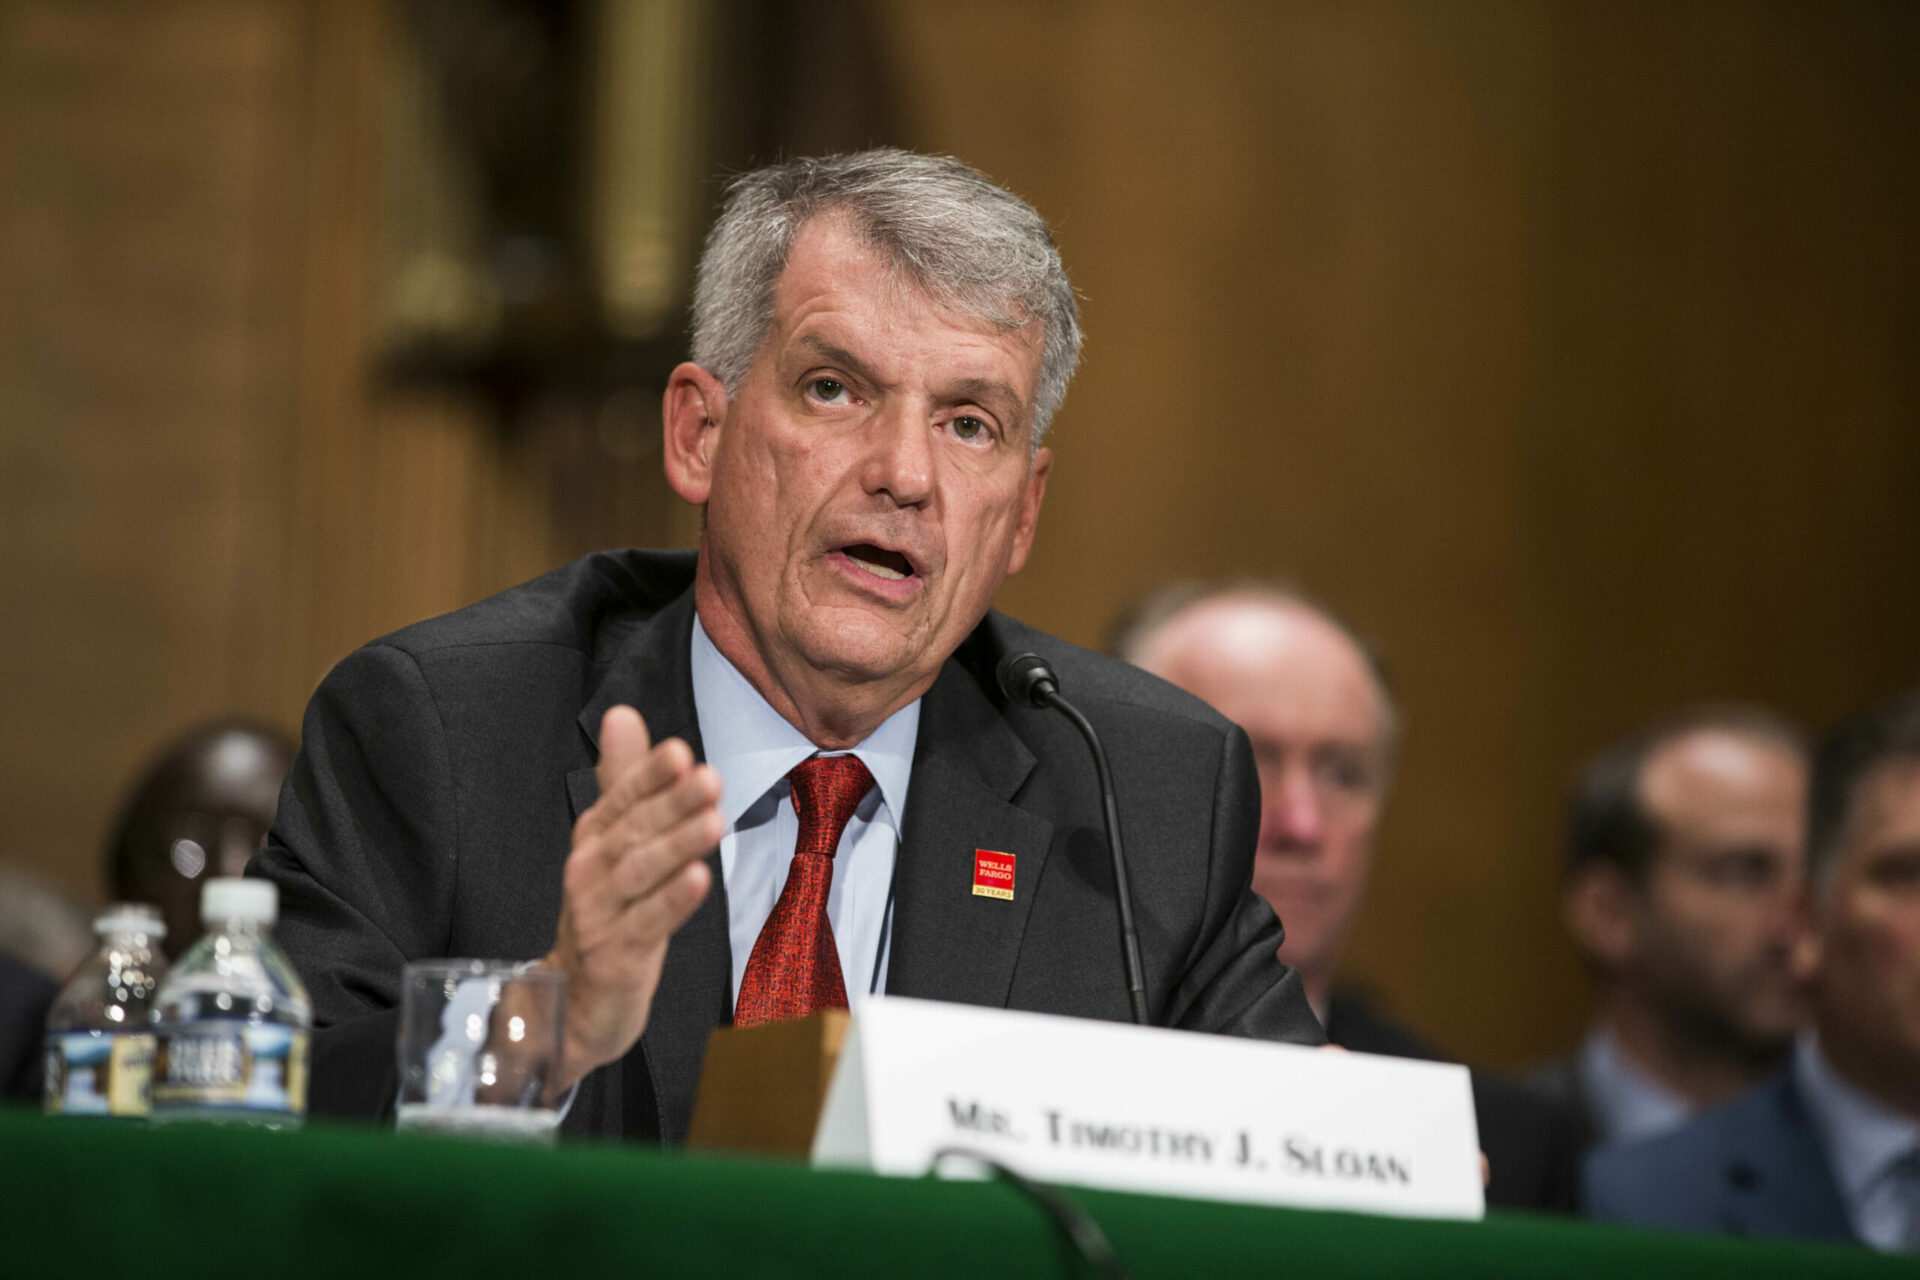 Former Wells Fargo CEO sues bank for $34 million, says he was a sales scandal scapegoat